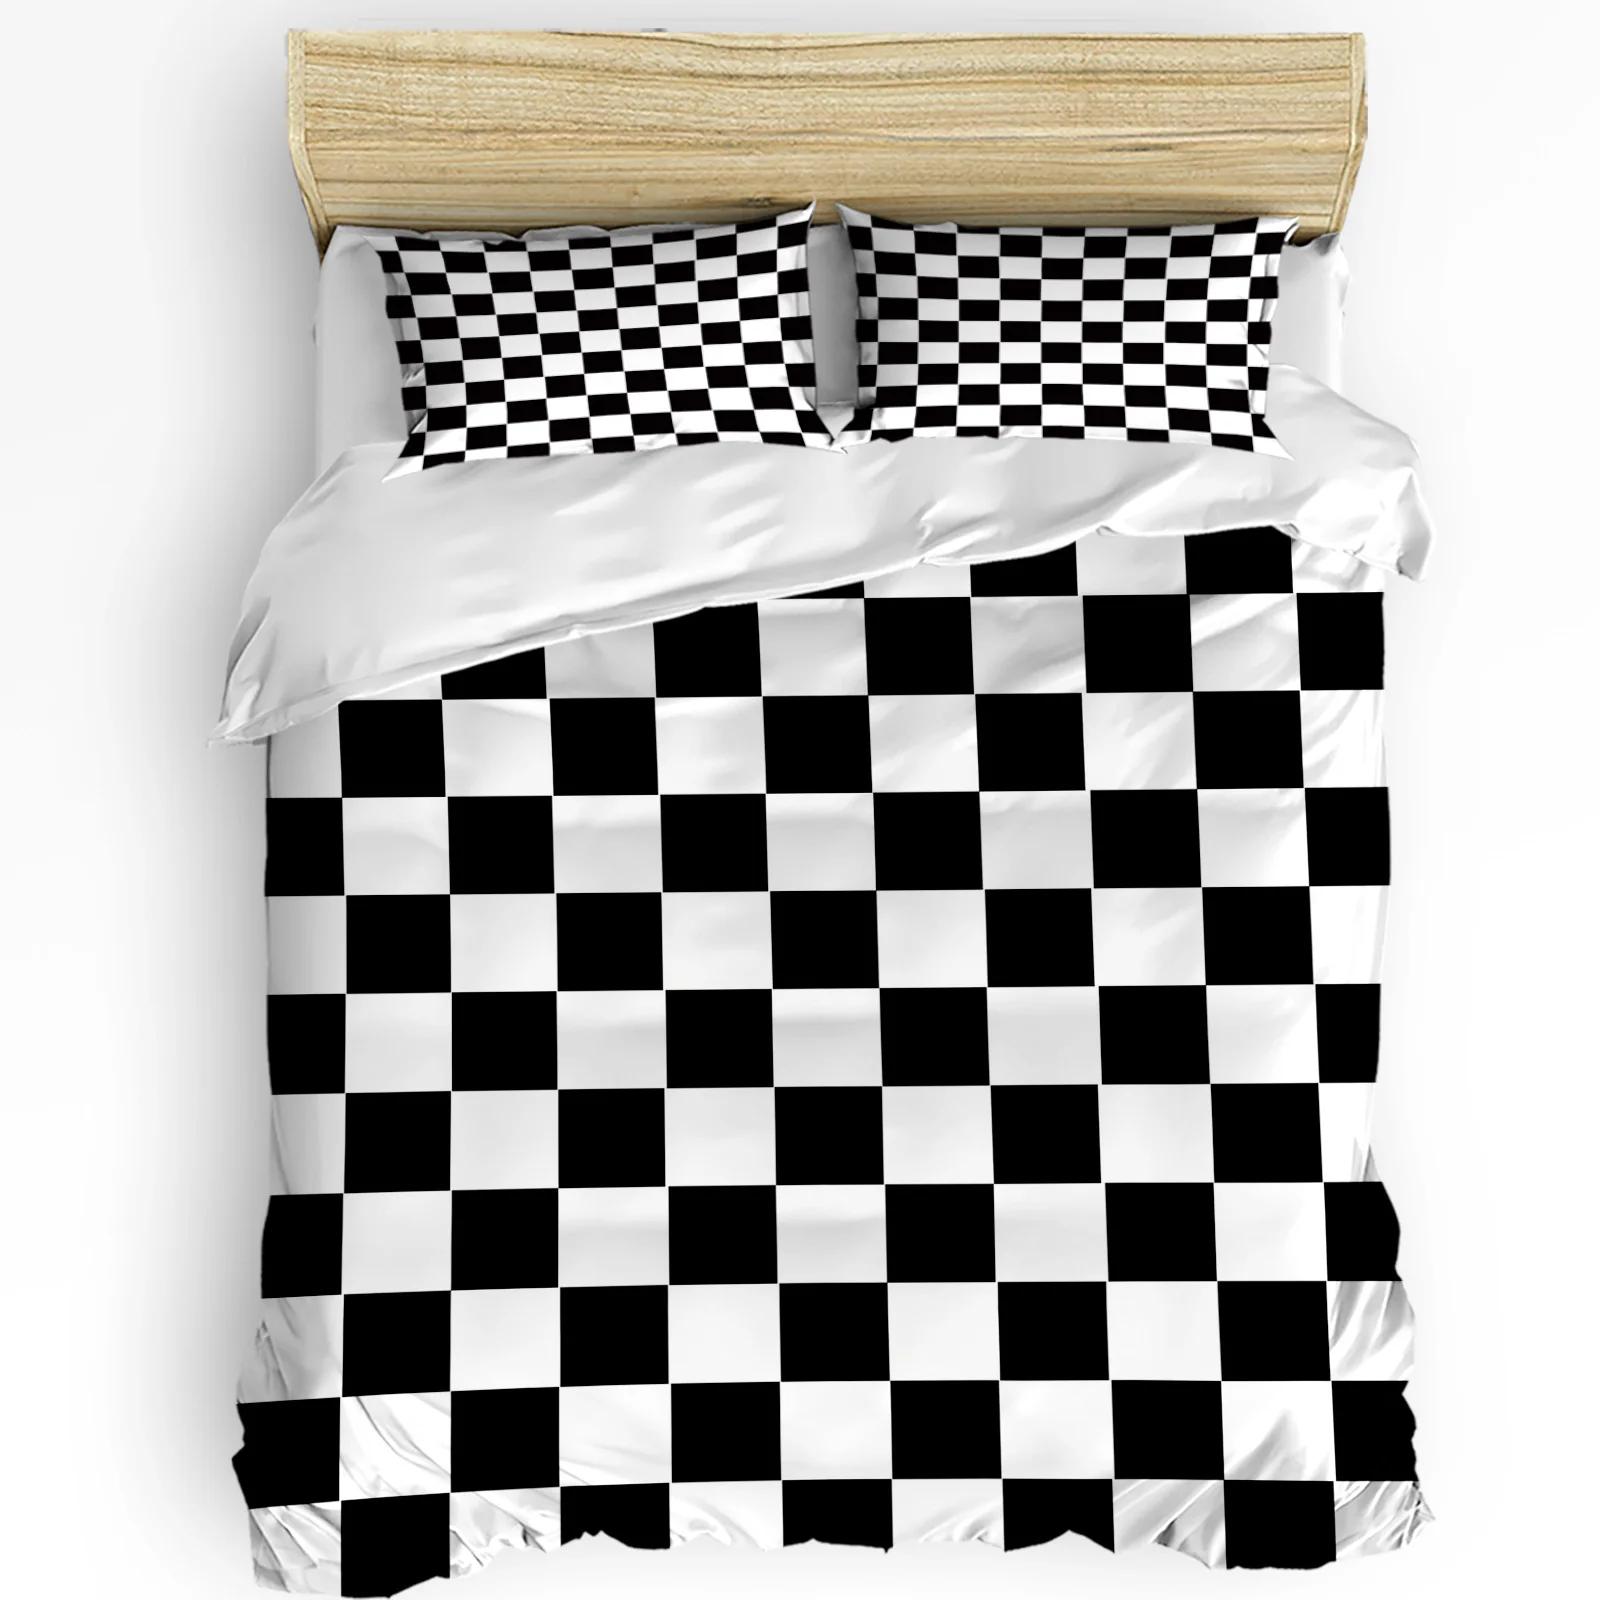 Black And White Checkered Simple Plaid Duvet CoverPillow Case Custom 3pcs Bedding Set Quilt Cover Double Bed Home Te